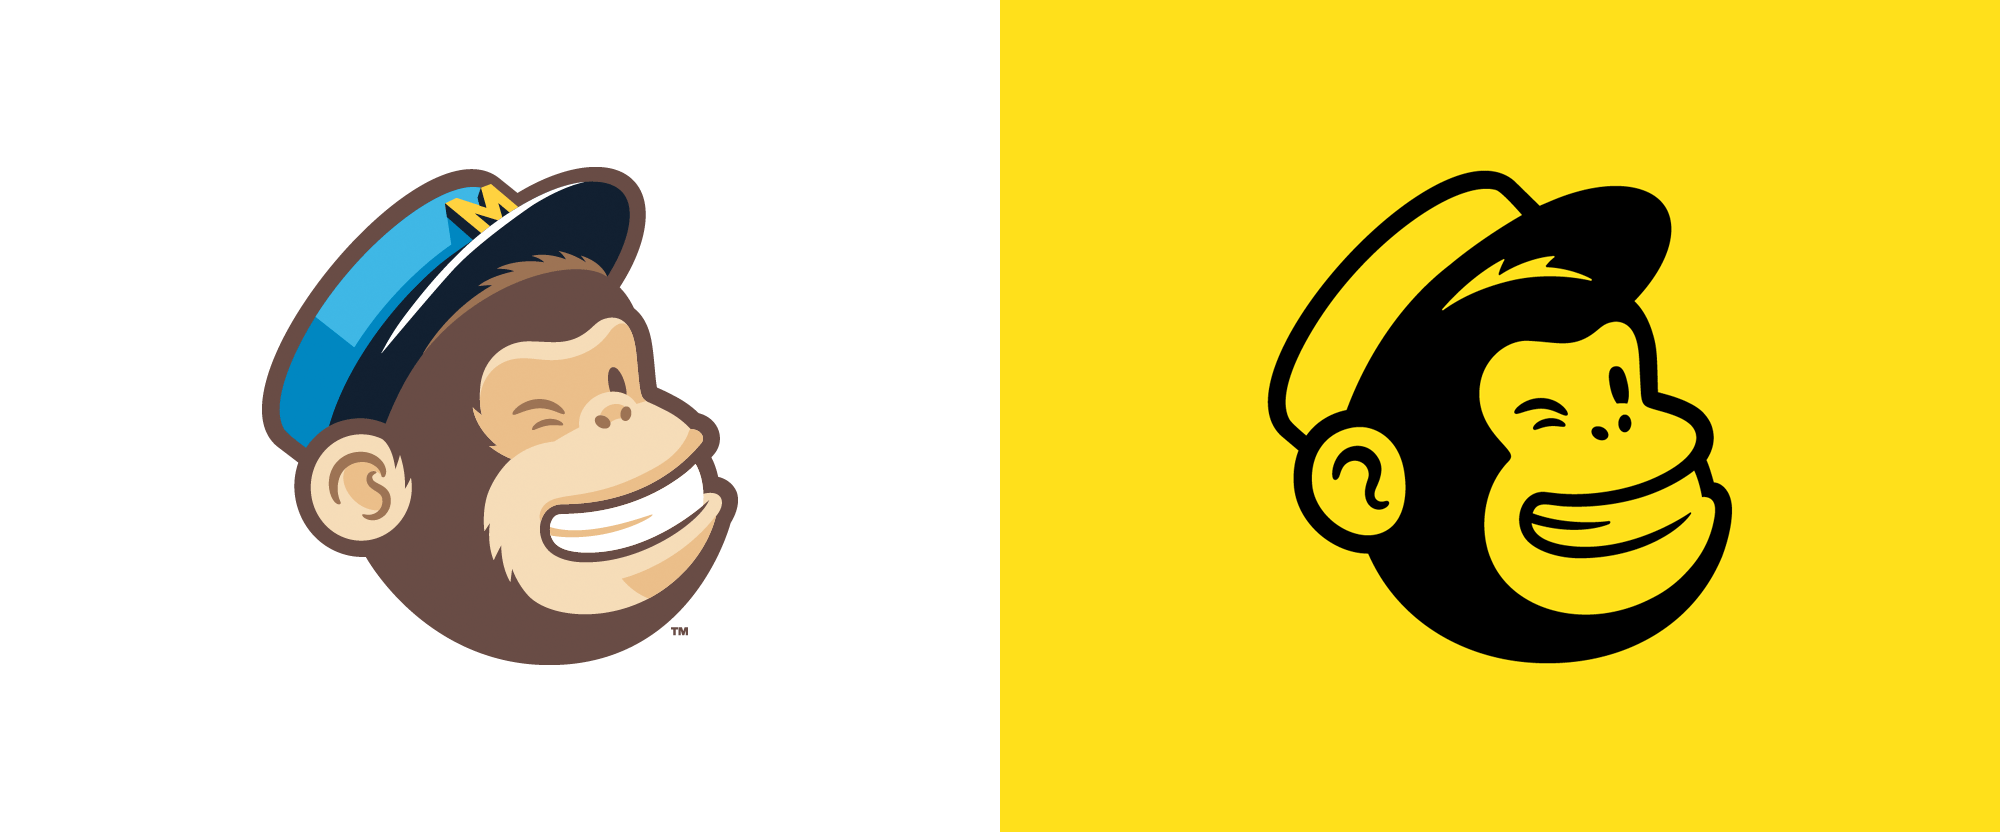 MailChimp Logo - Brand New: New Logo and Identity for Mailchimp by COLLINS and In-house